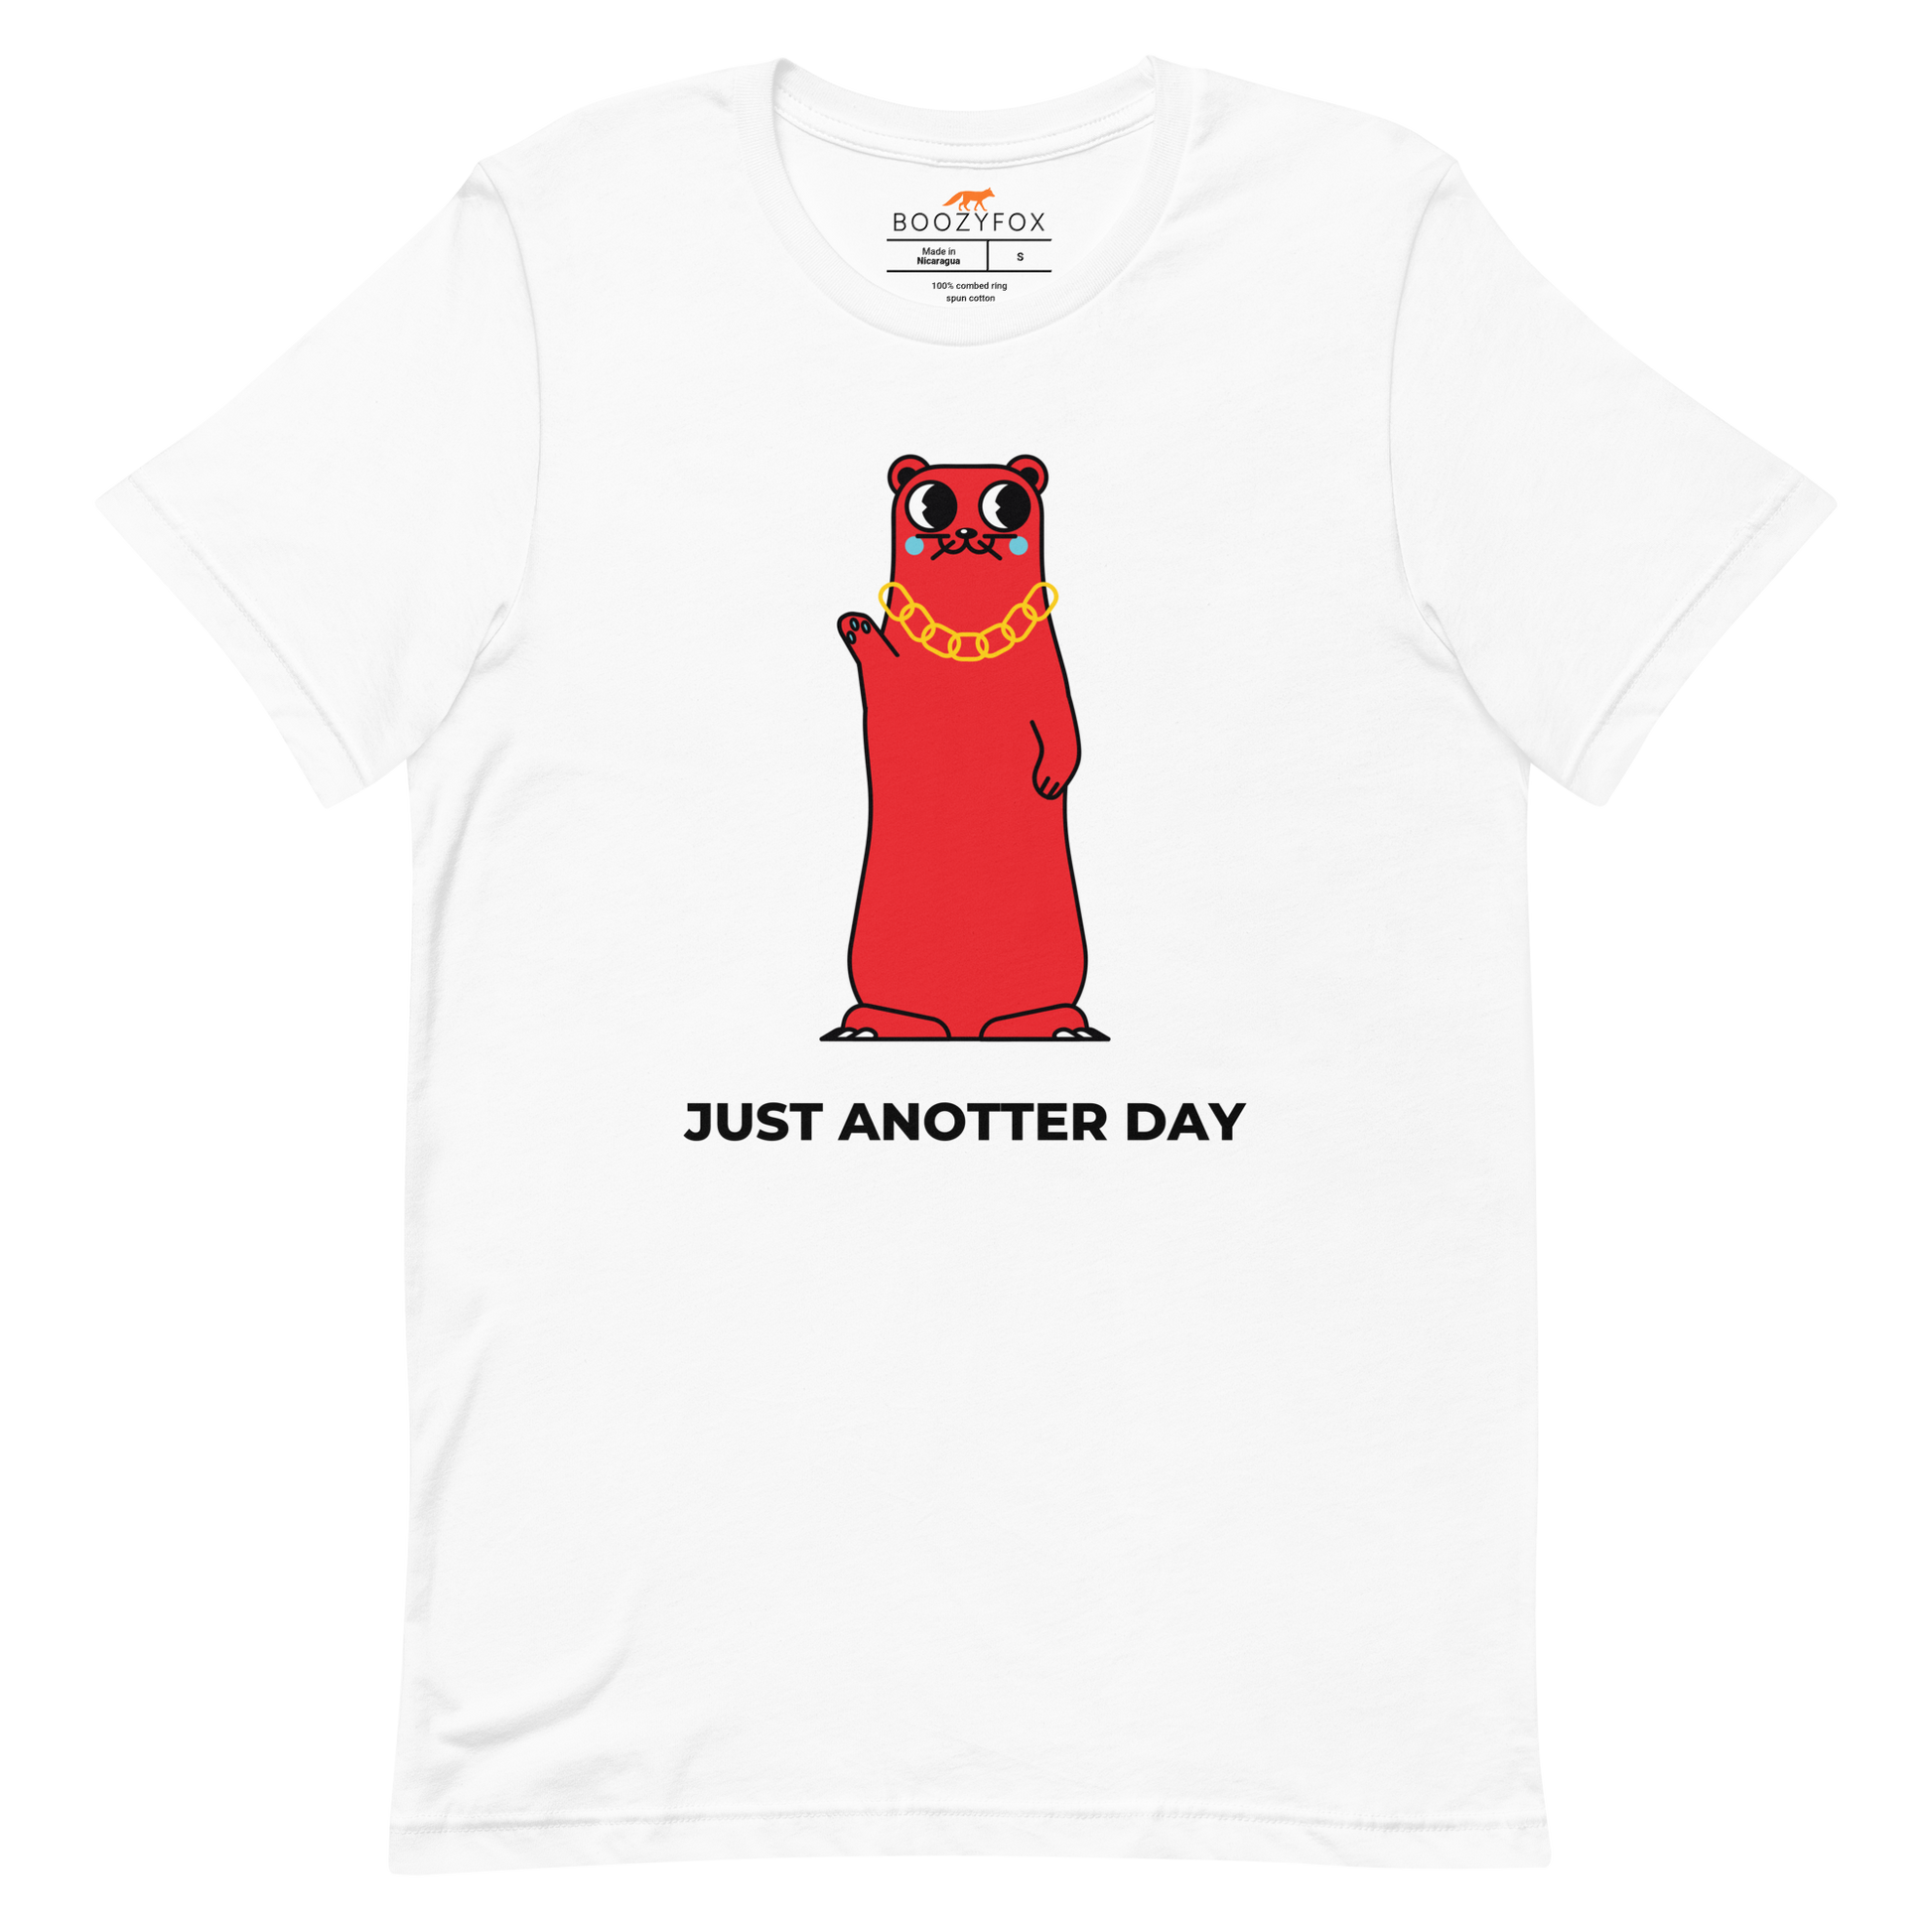 White Premium Otter T-Shirt featuring a Just Anotter Day graphic on the chest - Funny Graphic Otter Tees - Boozy Fox